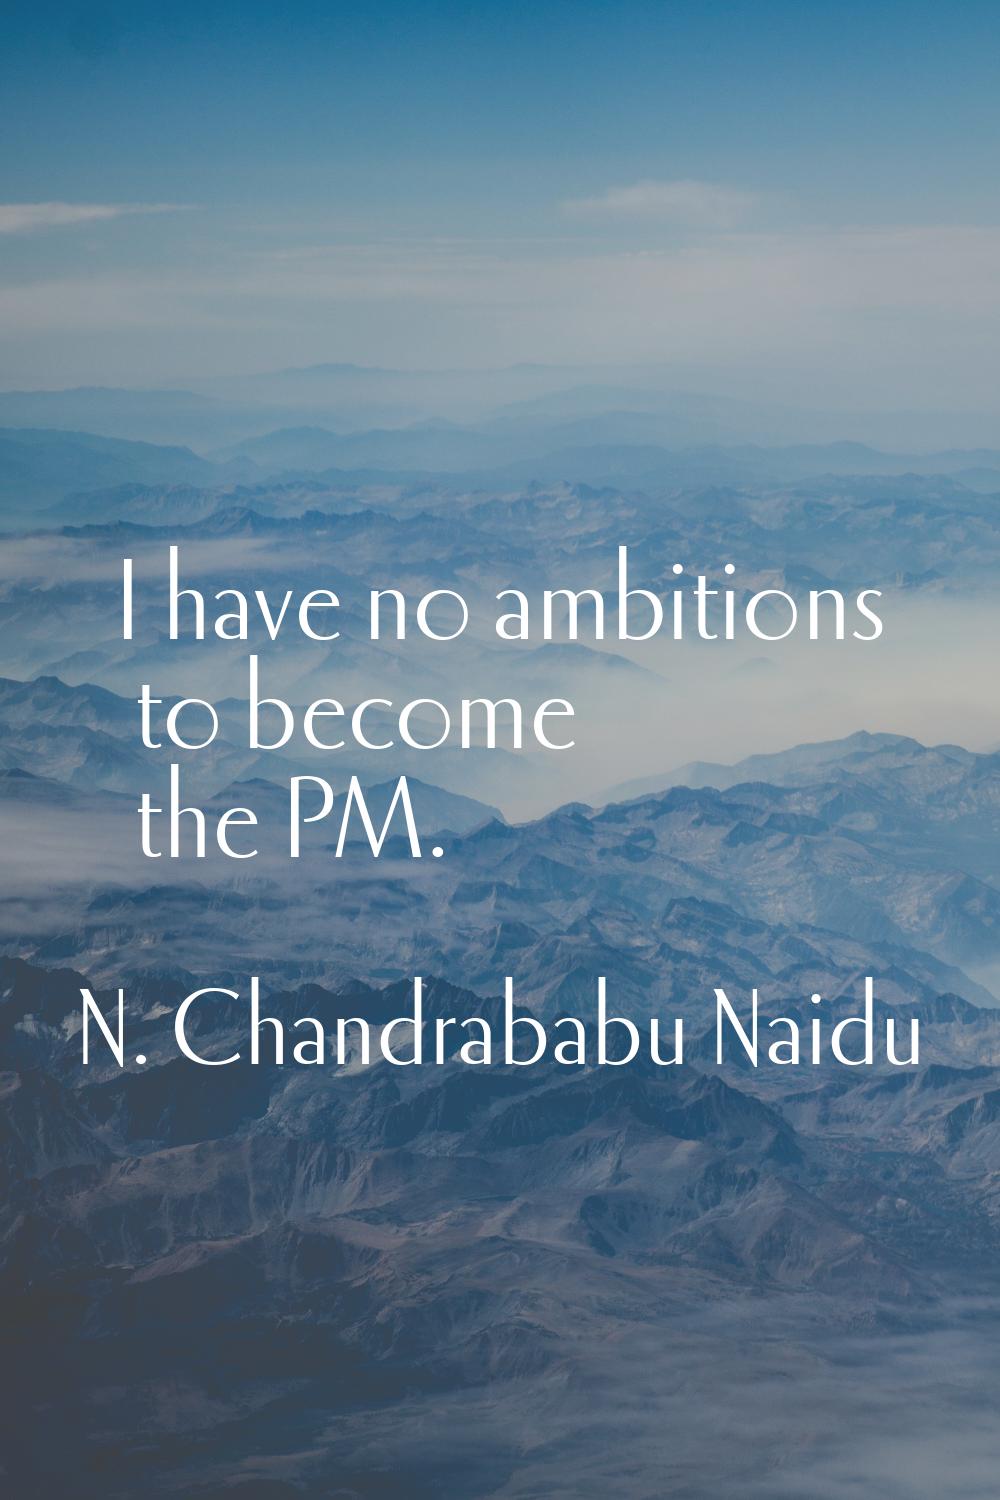 I have no ambitions to become the PM.